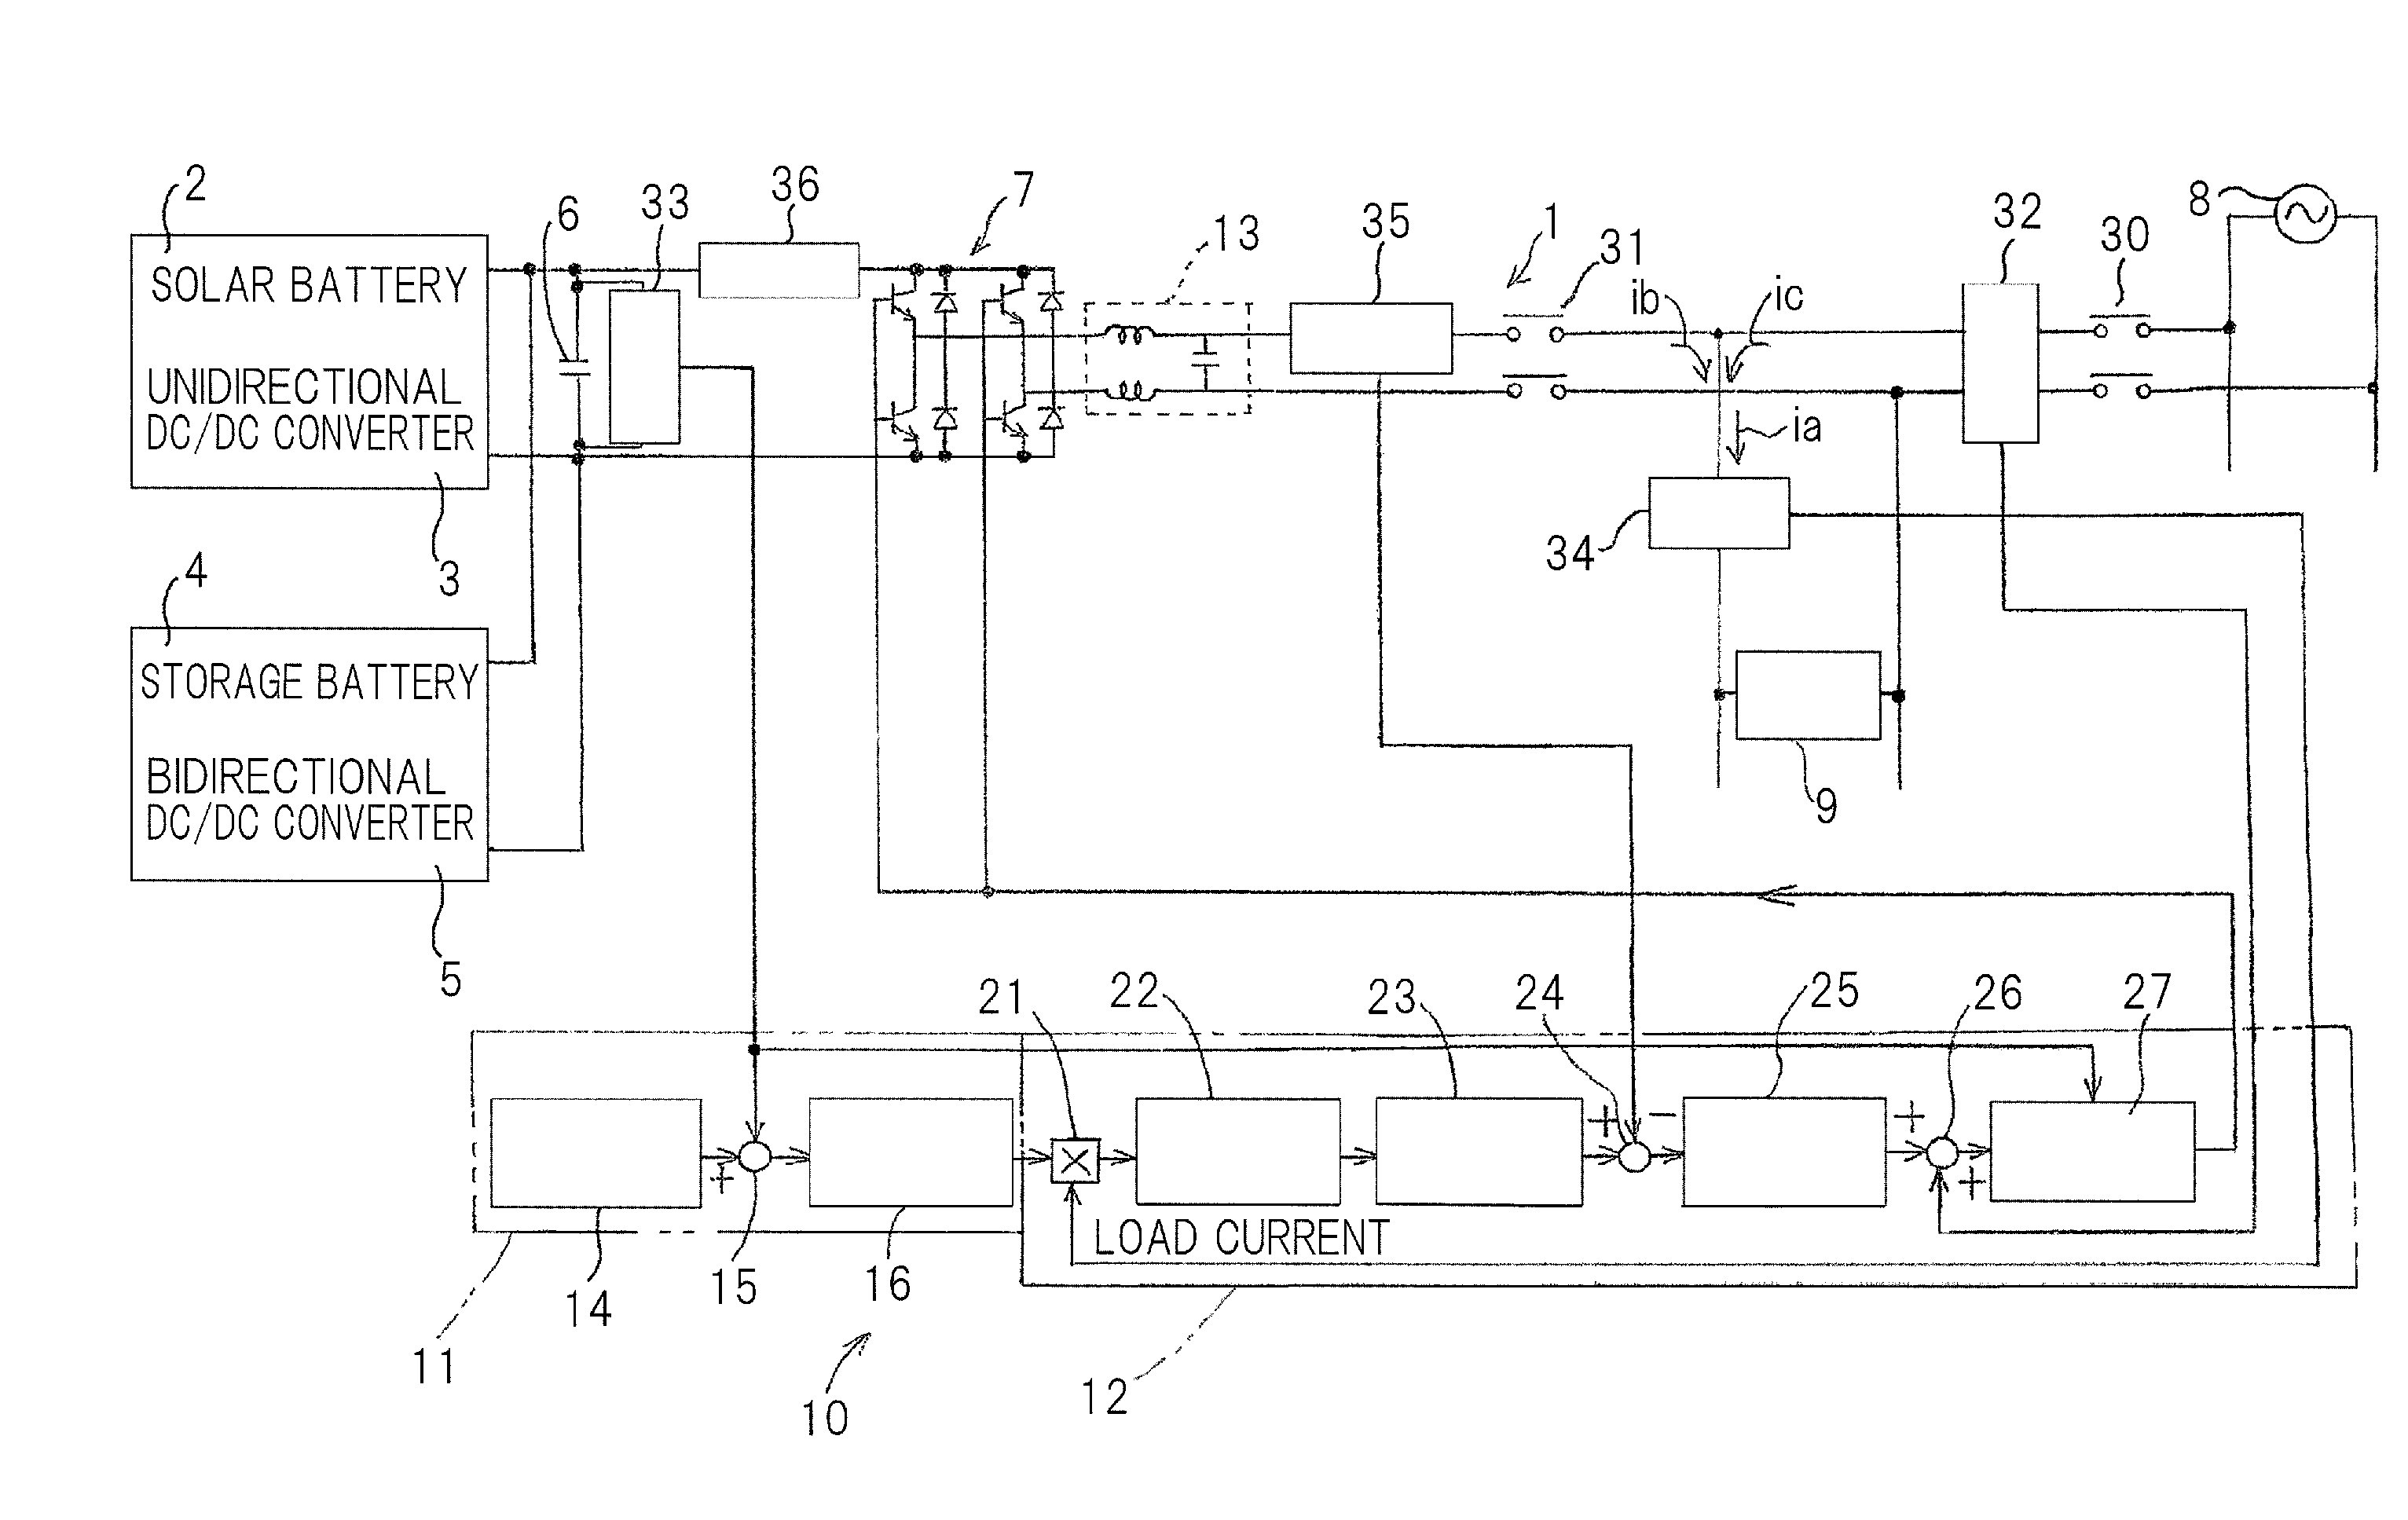 Distributed power source system with storage battery